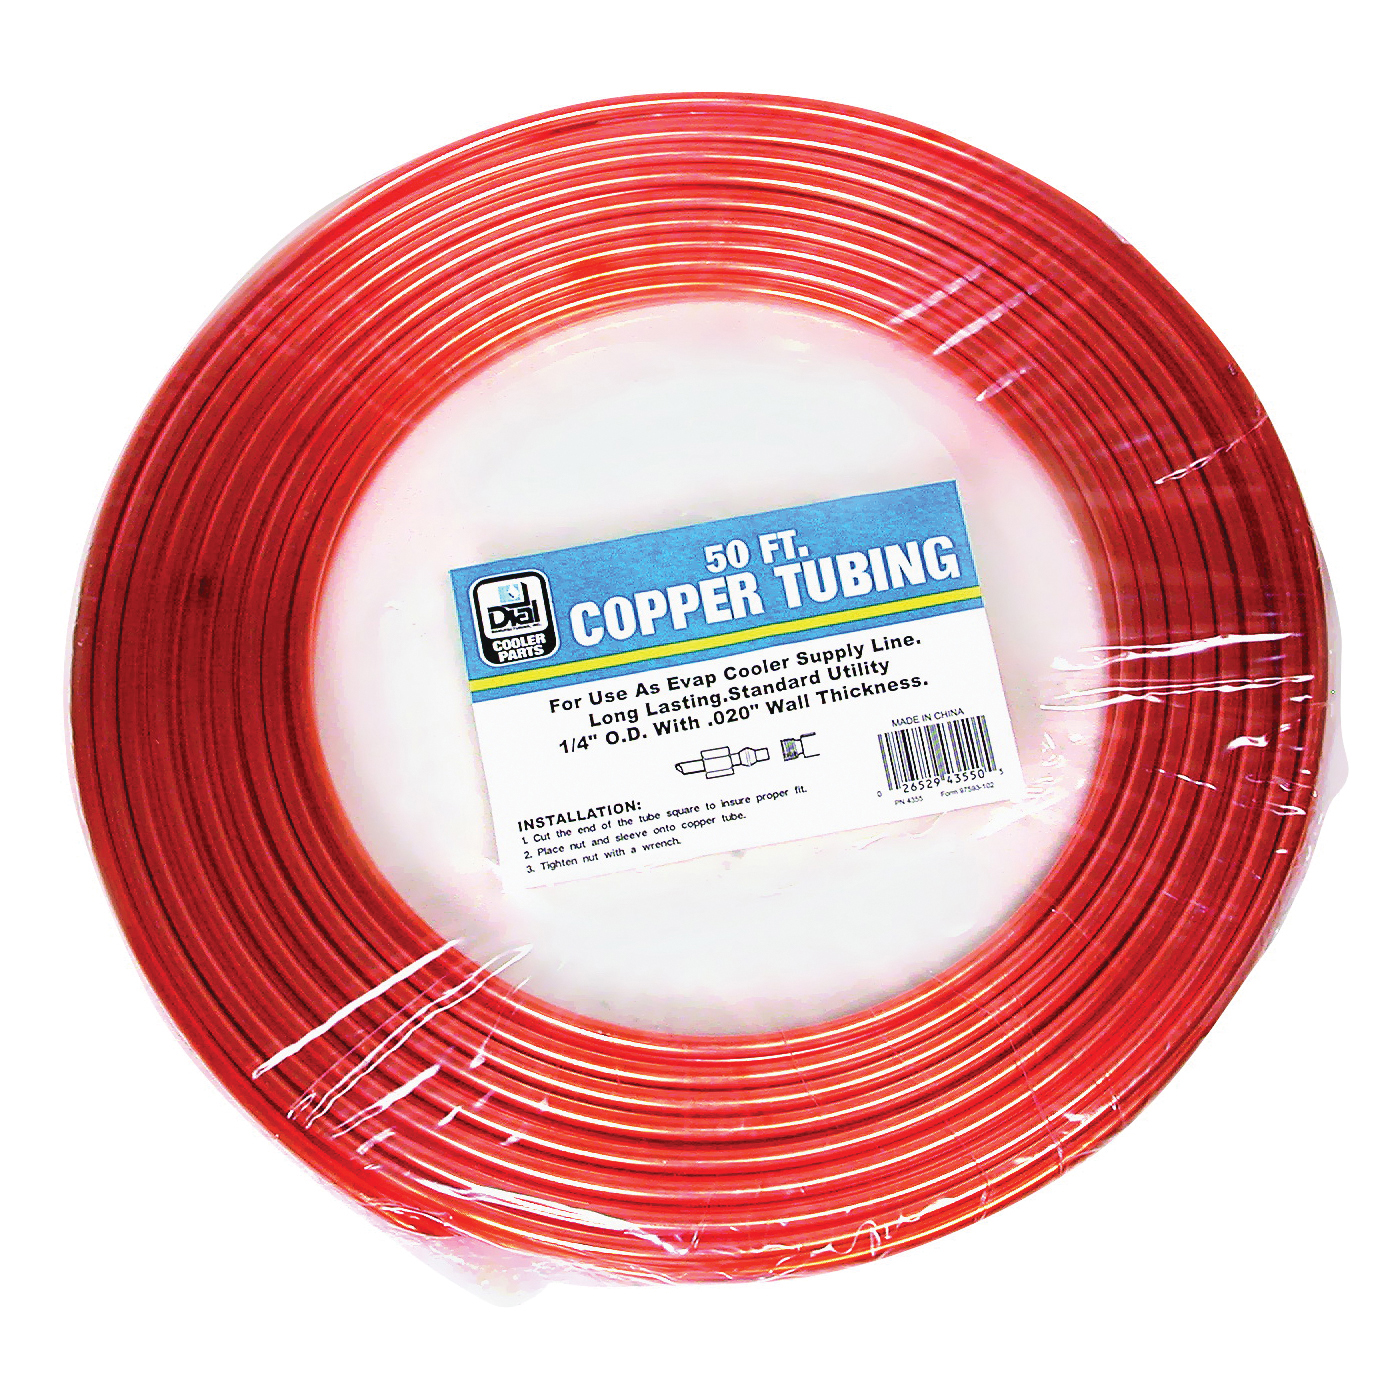 4355 Cooler Tubing, Copper, For: Evaporative Cooler Purge Systems